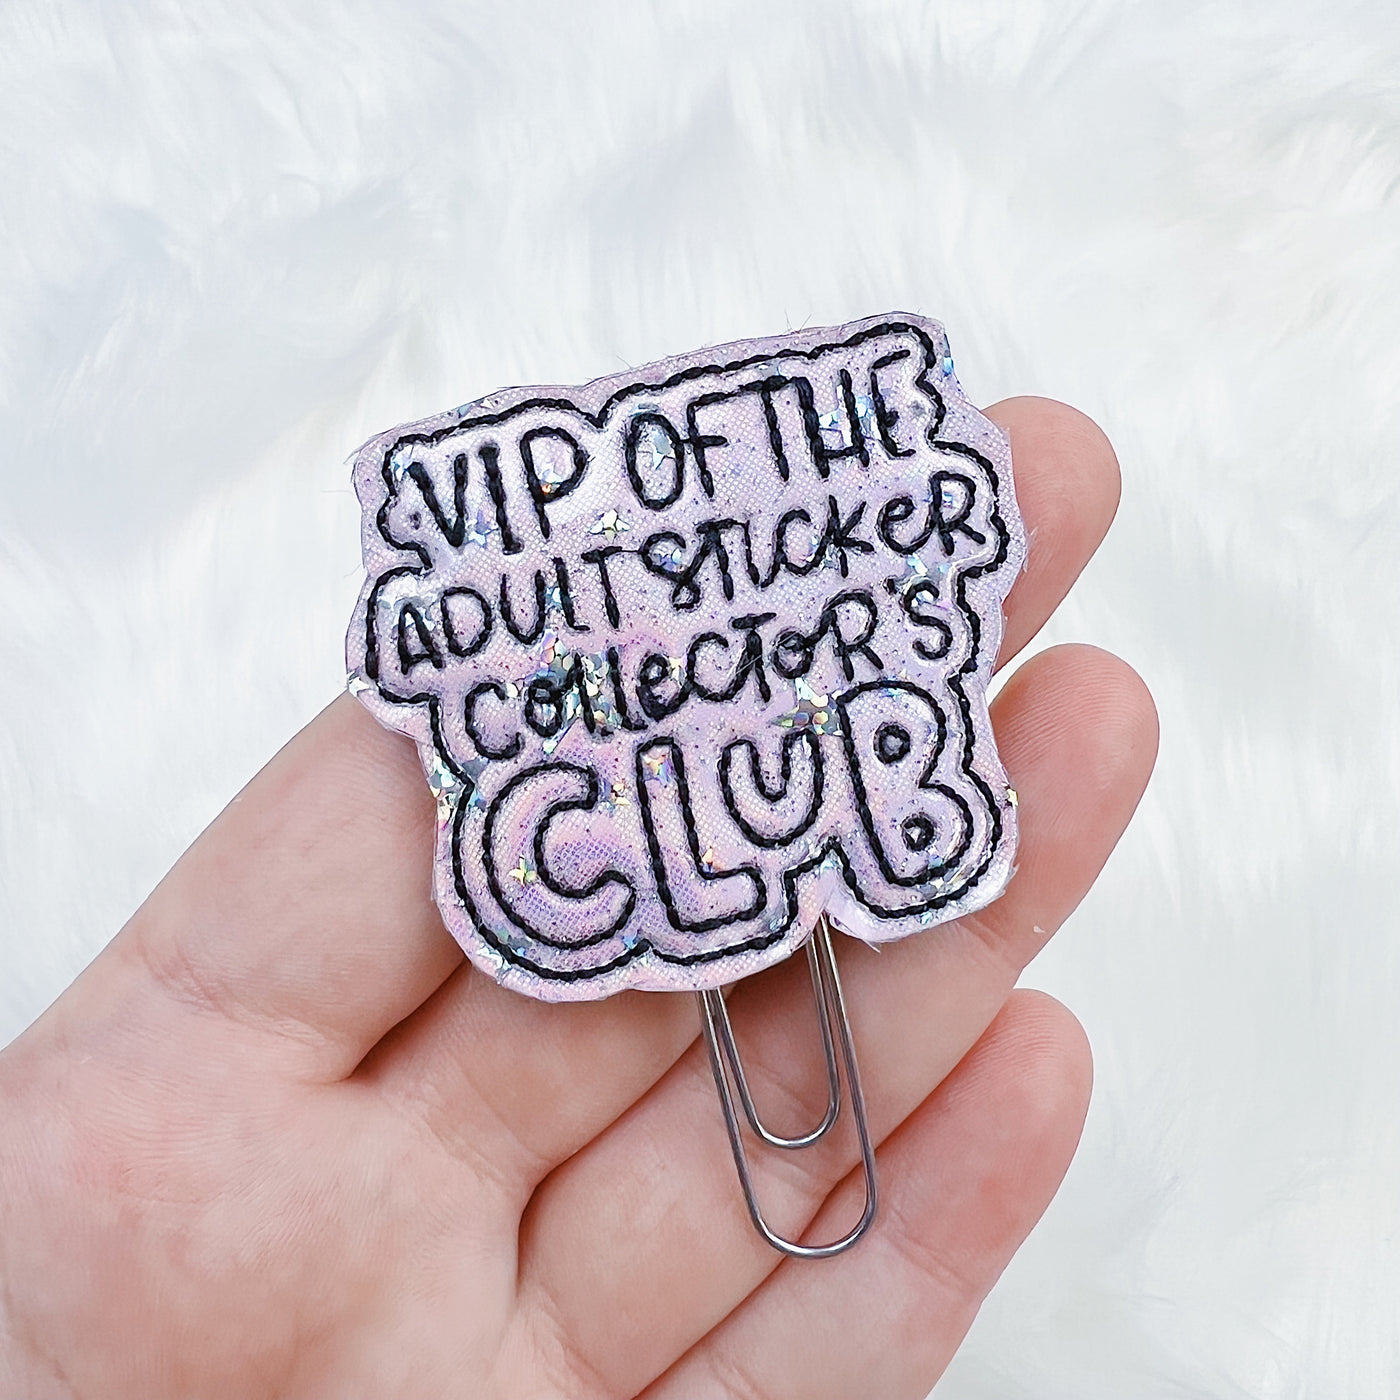 VIP Of The Adult Sticker Collector Club Feltie Planner Clip